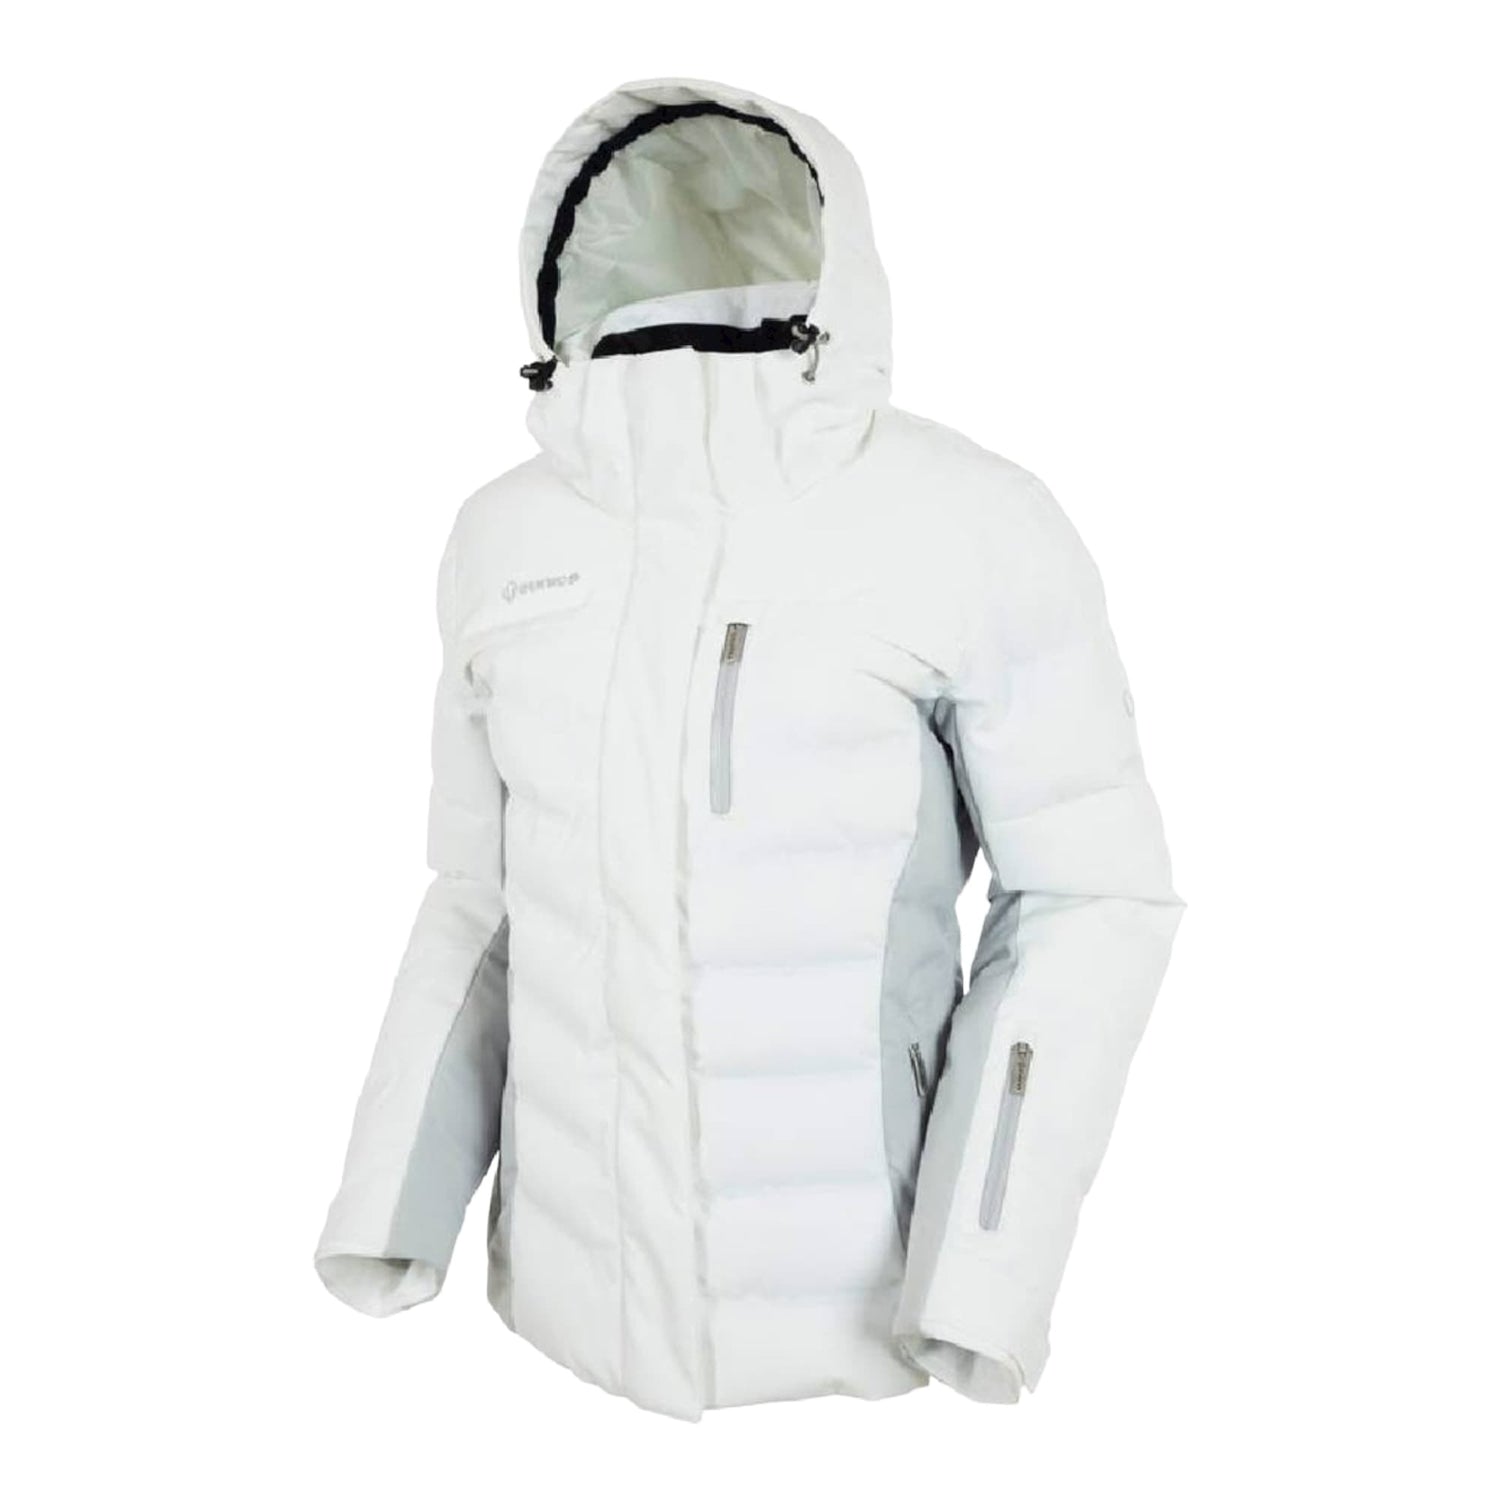 Women's stretch polyester ski jacket with detachable hood